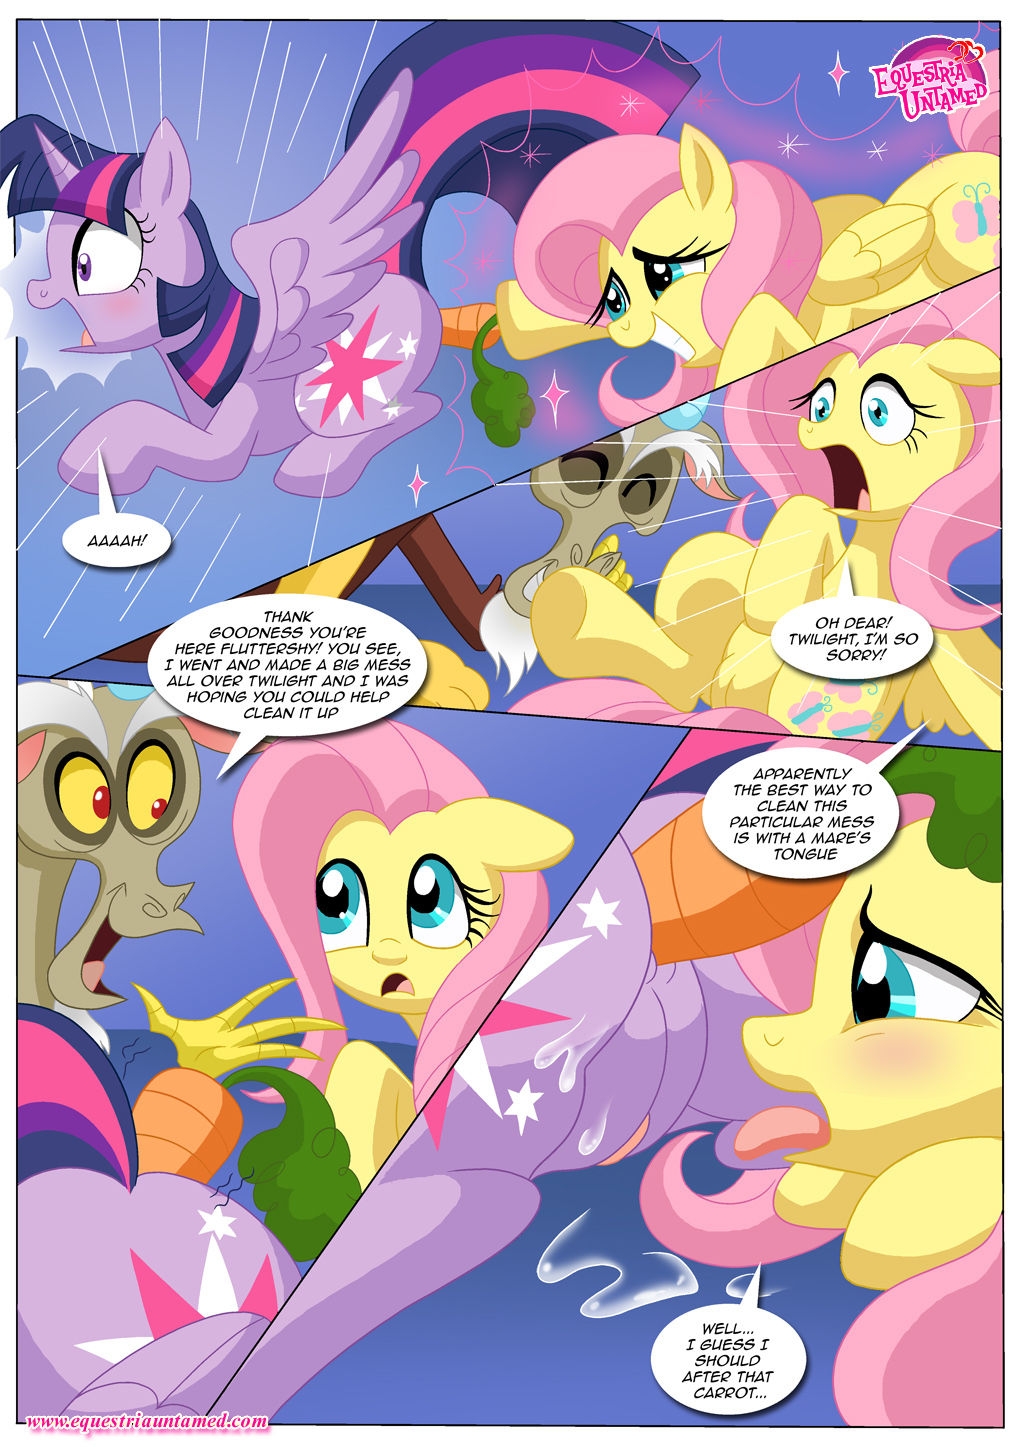 [Equestria Untamed (Palcomix)] Libraries Are Supposed To Be Quiet (My Little Pony Friendship Is Magic) 11